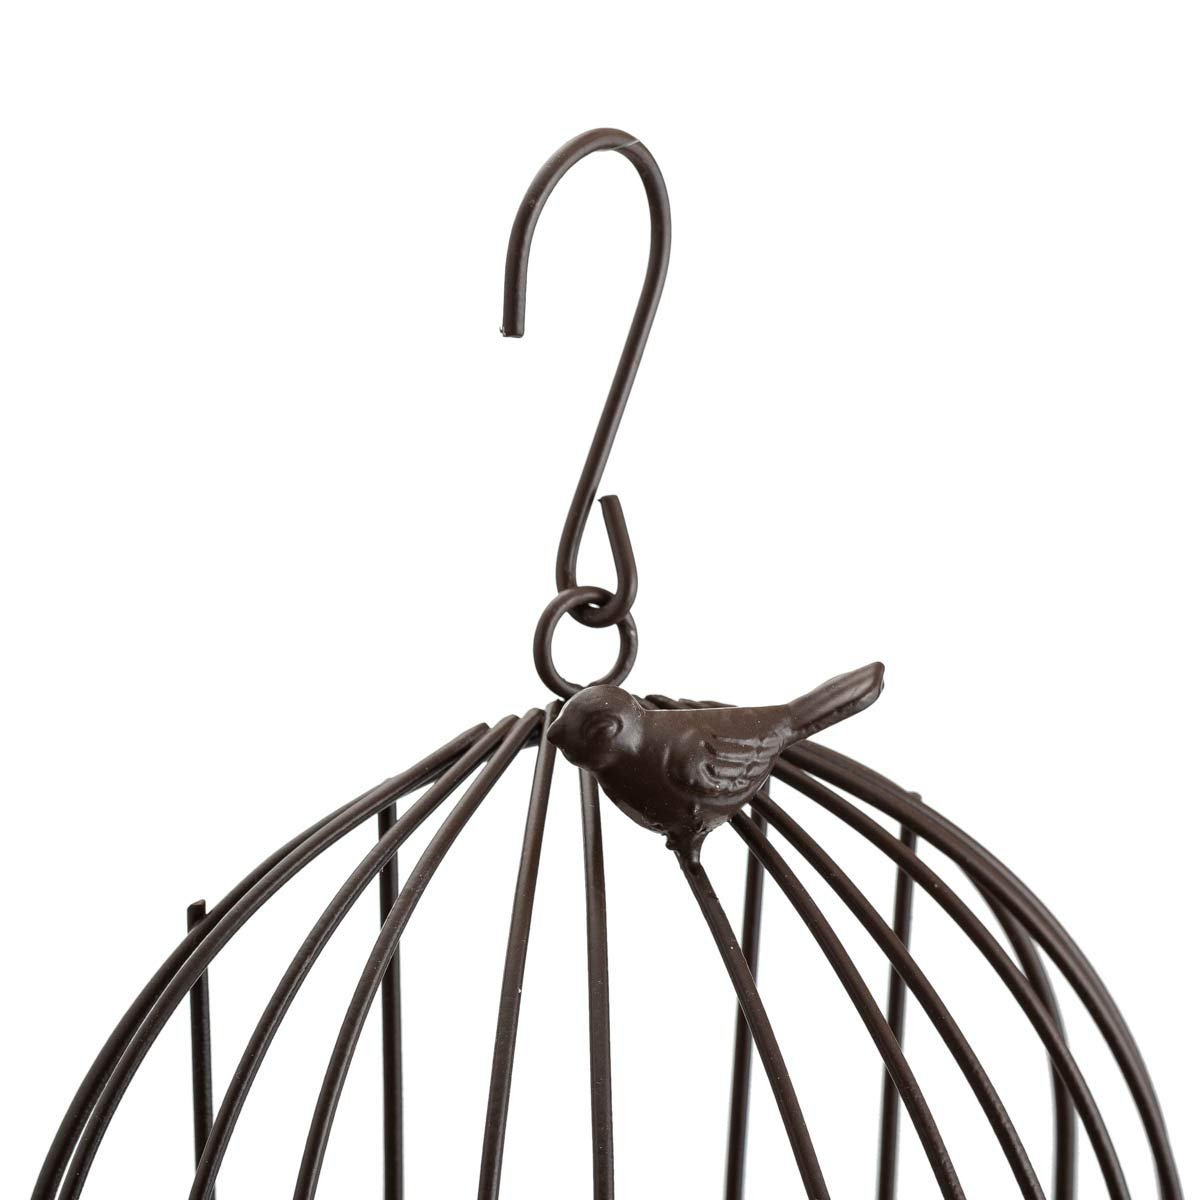 TJ Global 2-Plant Iron Birdcage Hanging Planter, Metal Wire Flower Pot Basket Wrought Iron Plant Stands for Plants, Flowers, Garden, Patio, Balcony Outdoor and Indoor Dcor - image 5 of 6